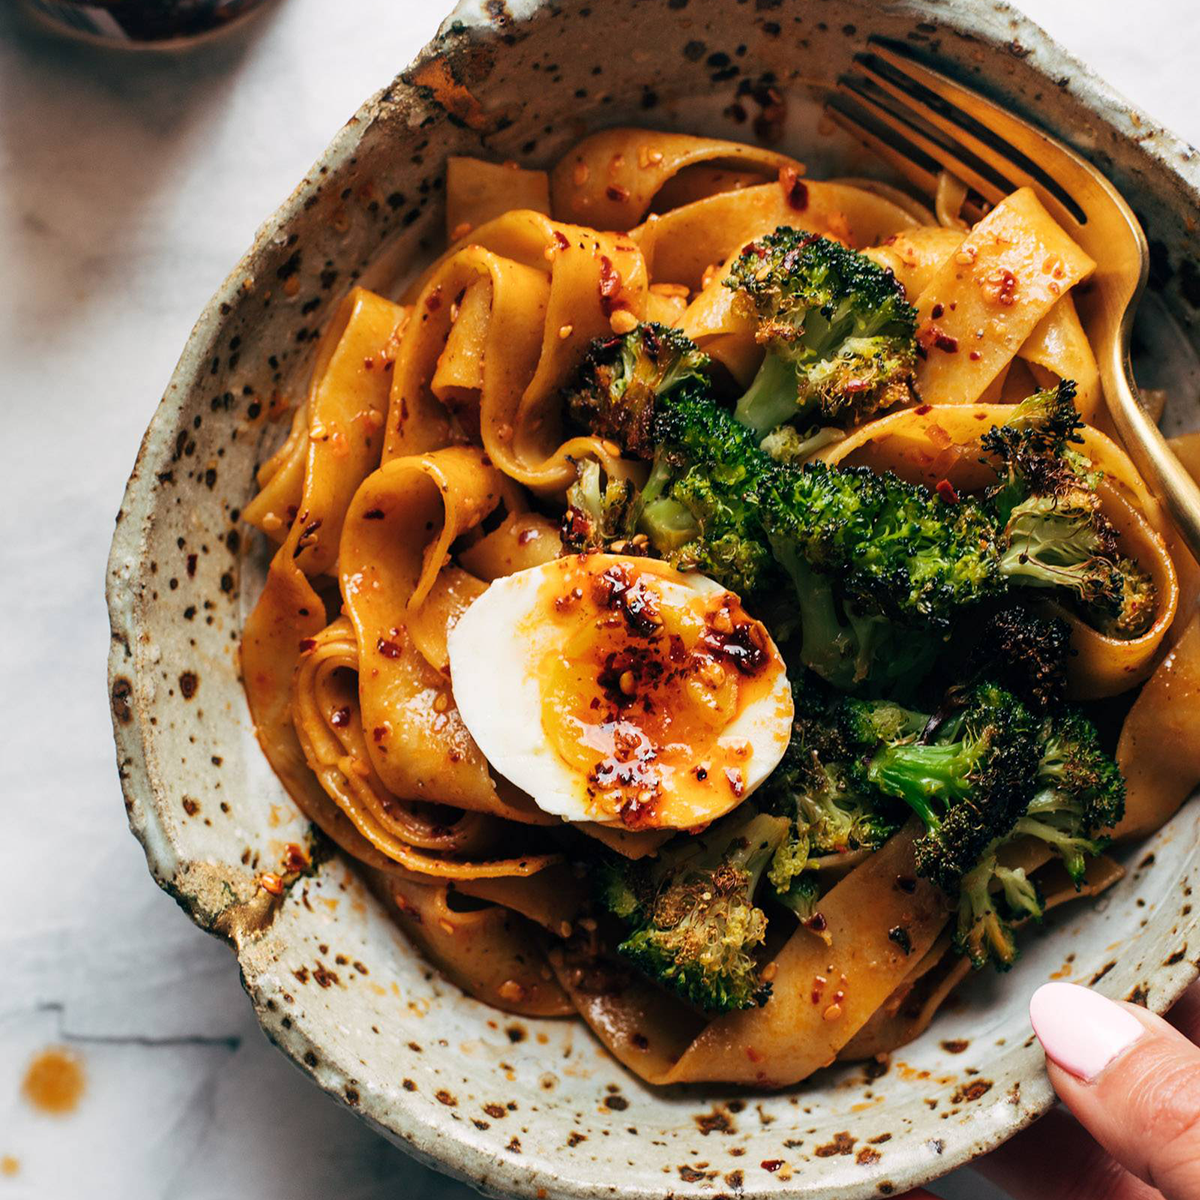 Chili Garlic Pappardelle with Smashed Broccoli and Soft Eggs